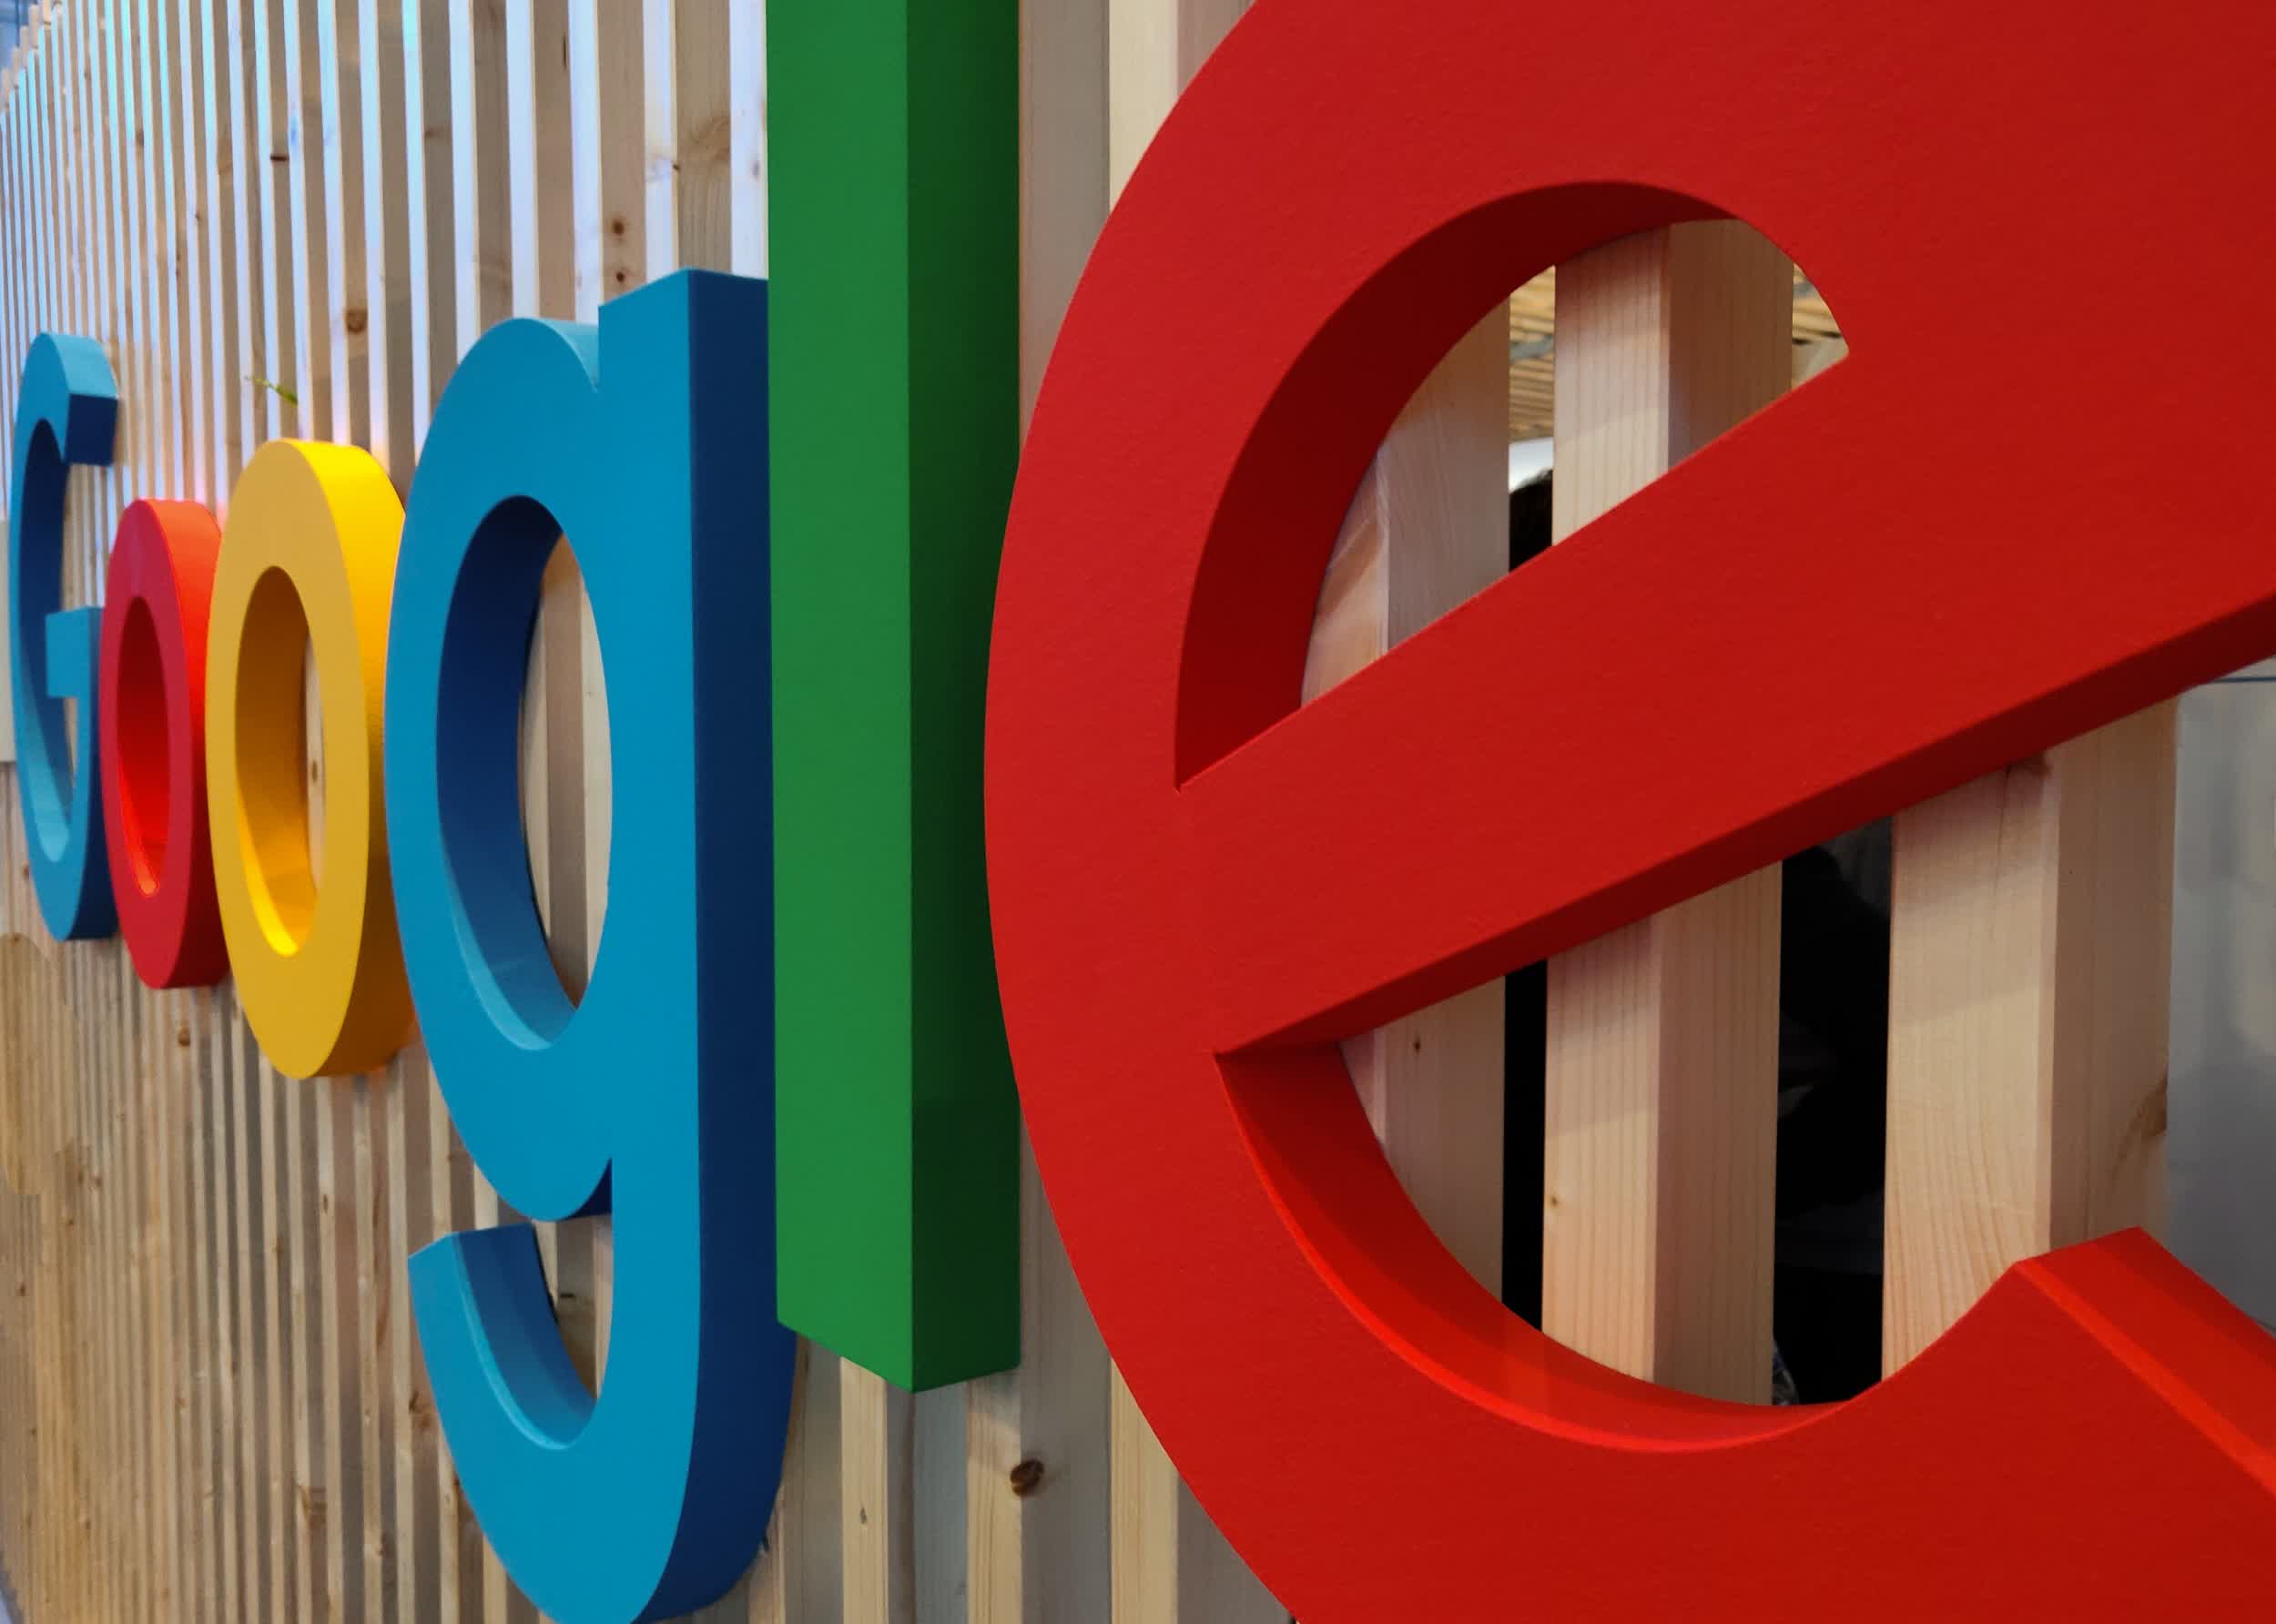 Google refuses to reinstate account after it flagged medical images as child abuse